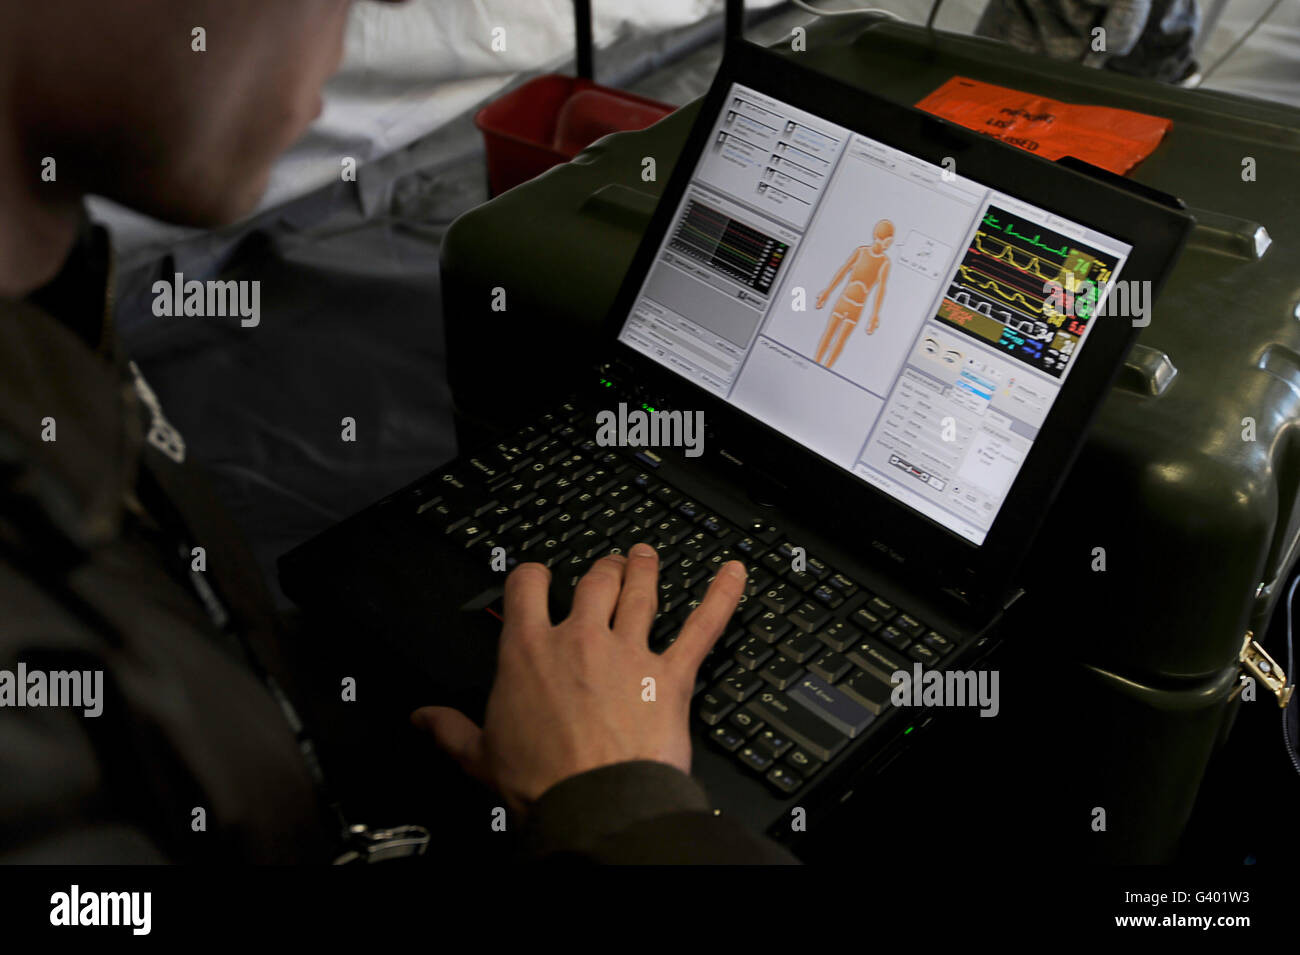 A U.S. Airman looks at a laptop to help apply medical aid. Stock Photo